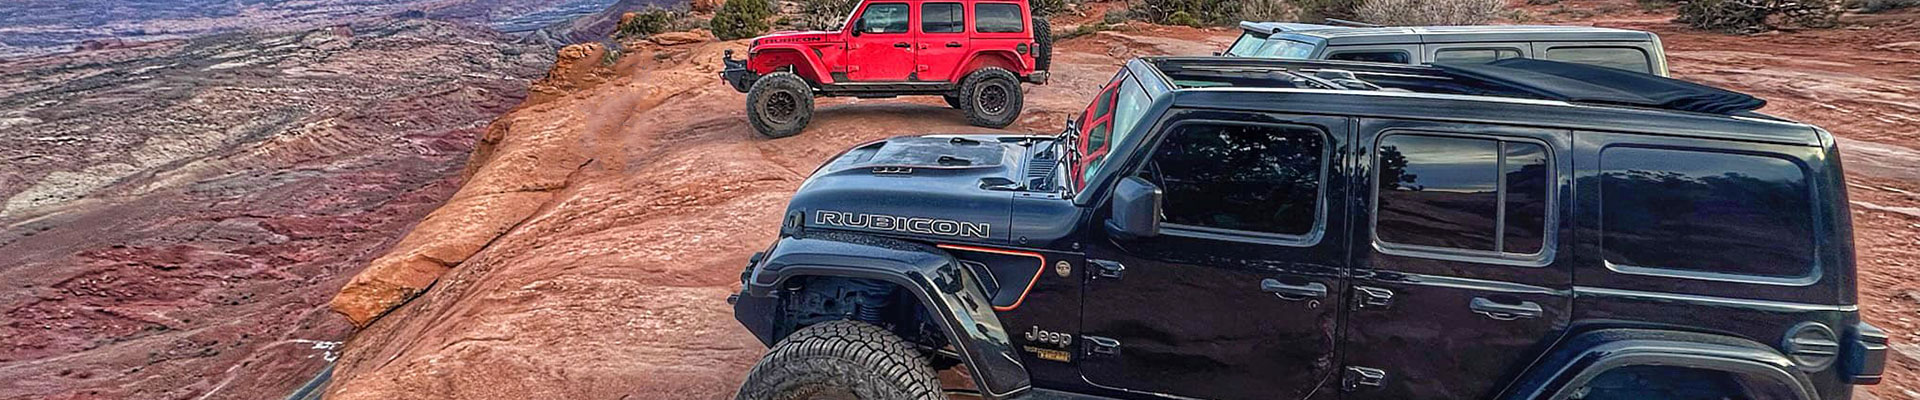 Fantasy RV Tours: 8 Day Moab Off-Roadin’ for Jeep Wrangler Owners (08UMOP-042124)